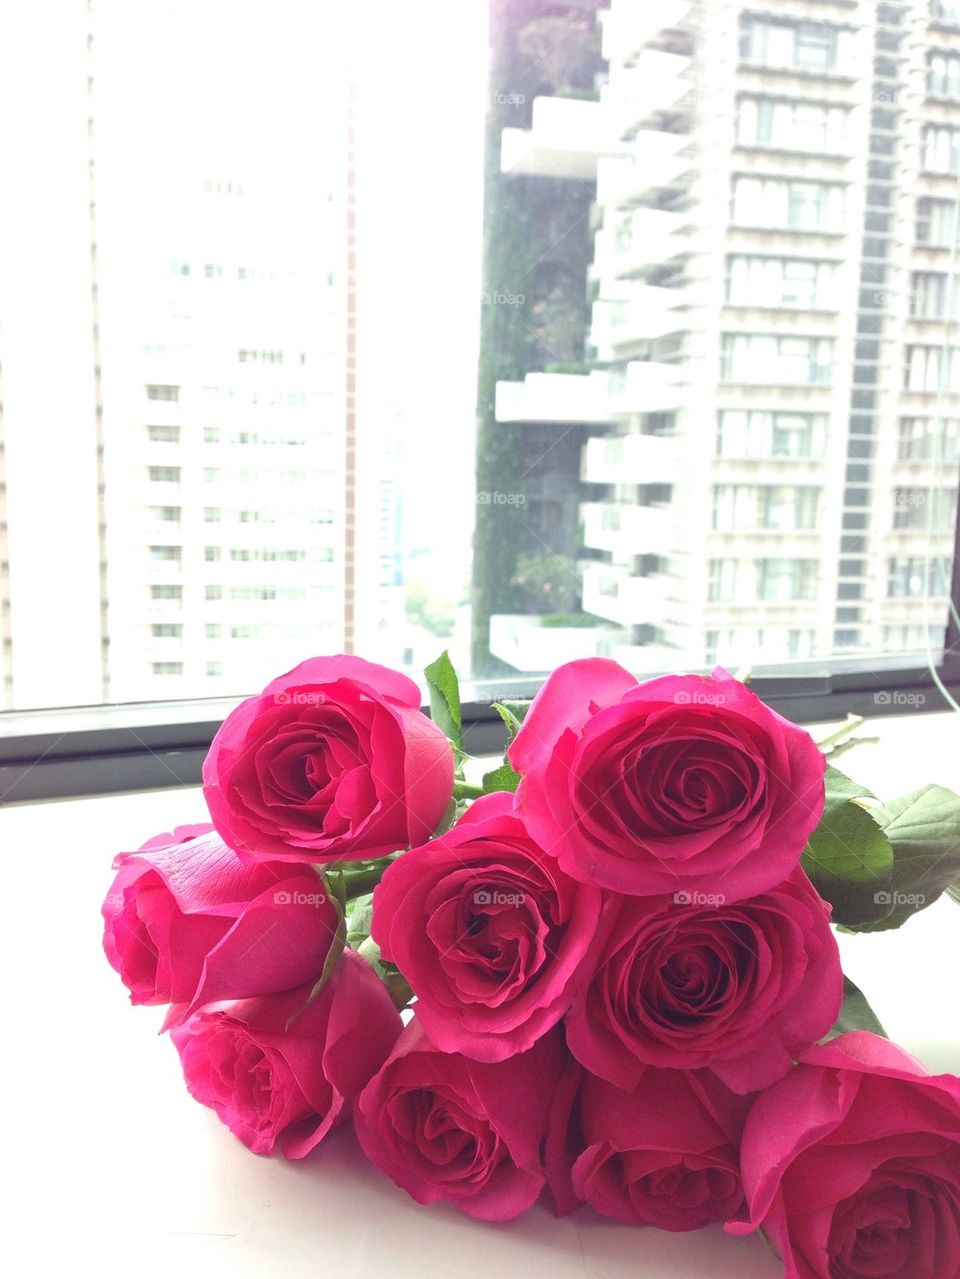 Flowers by the window